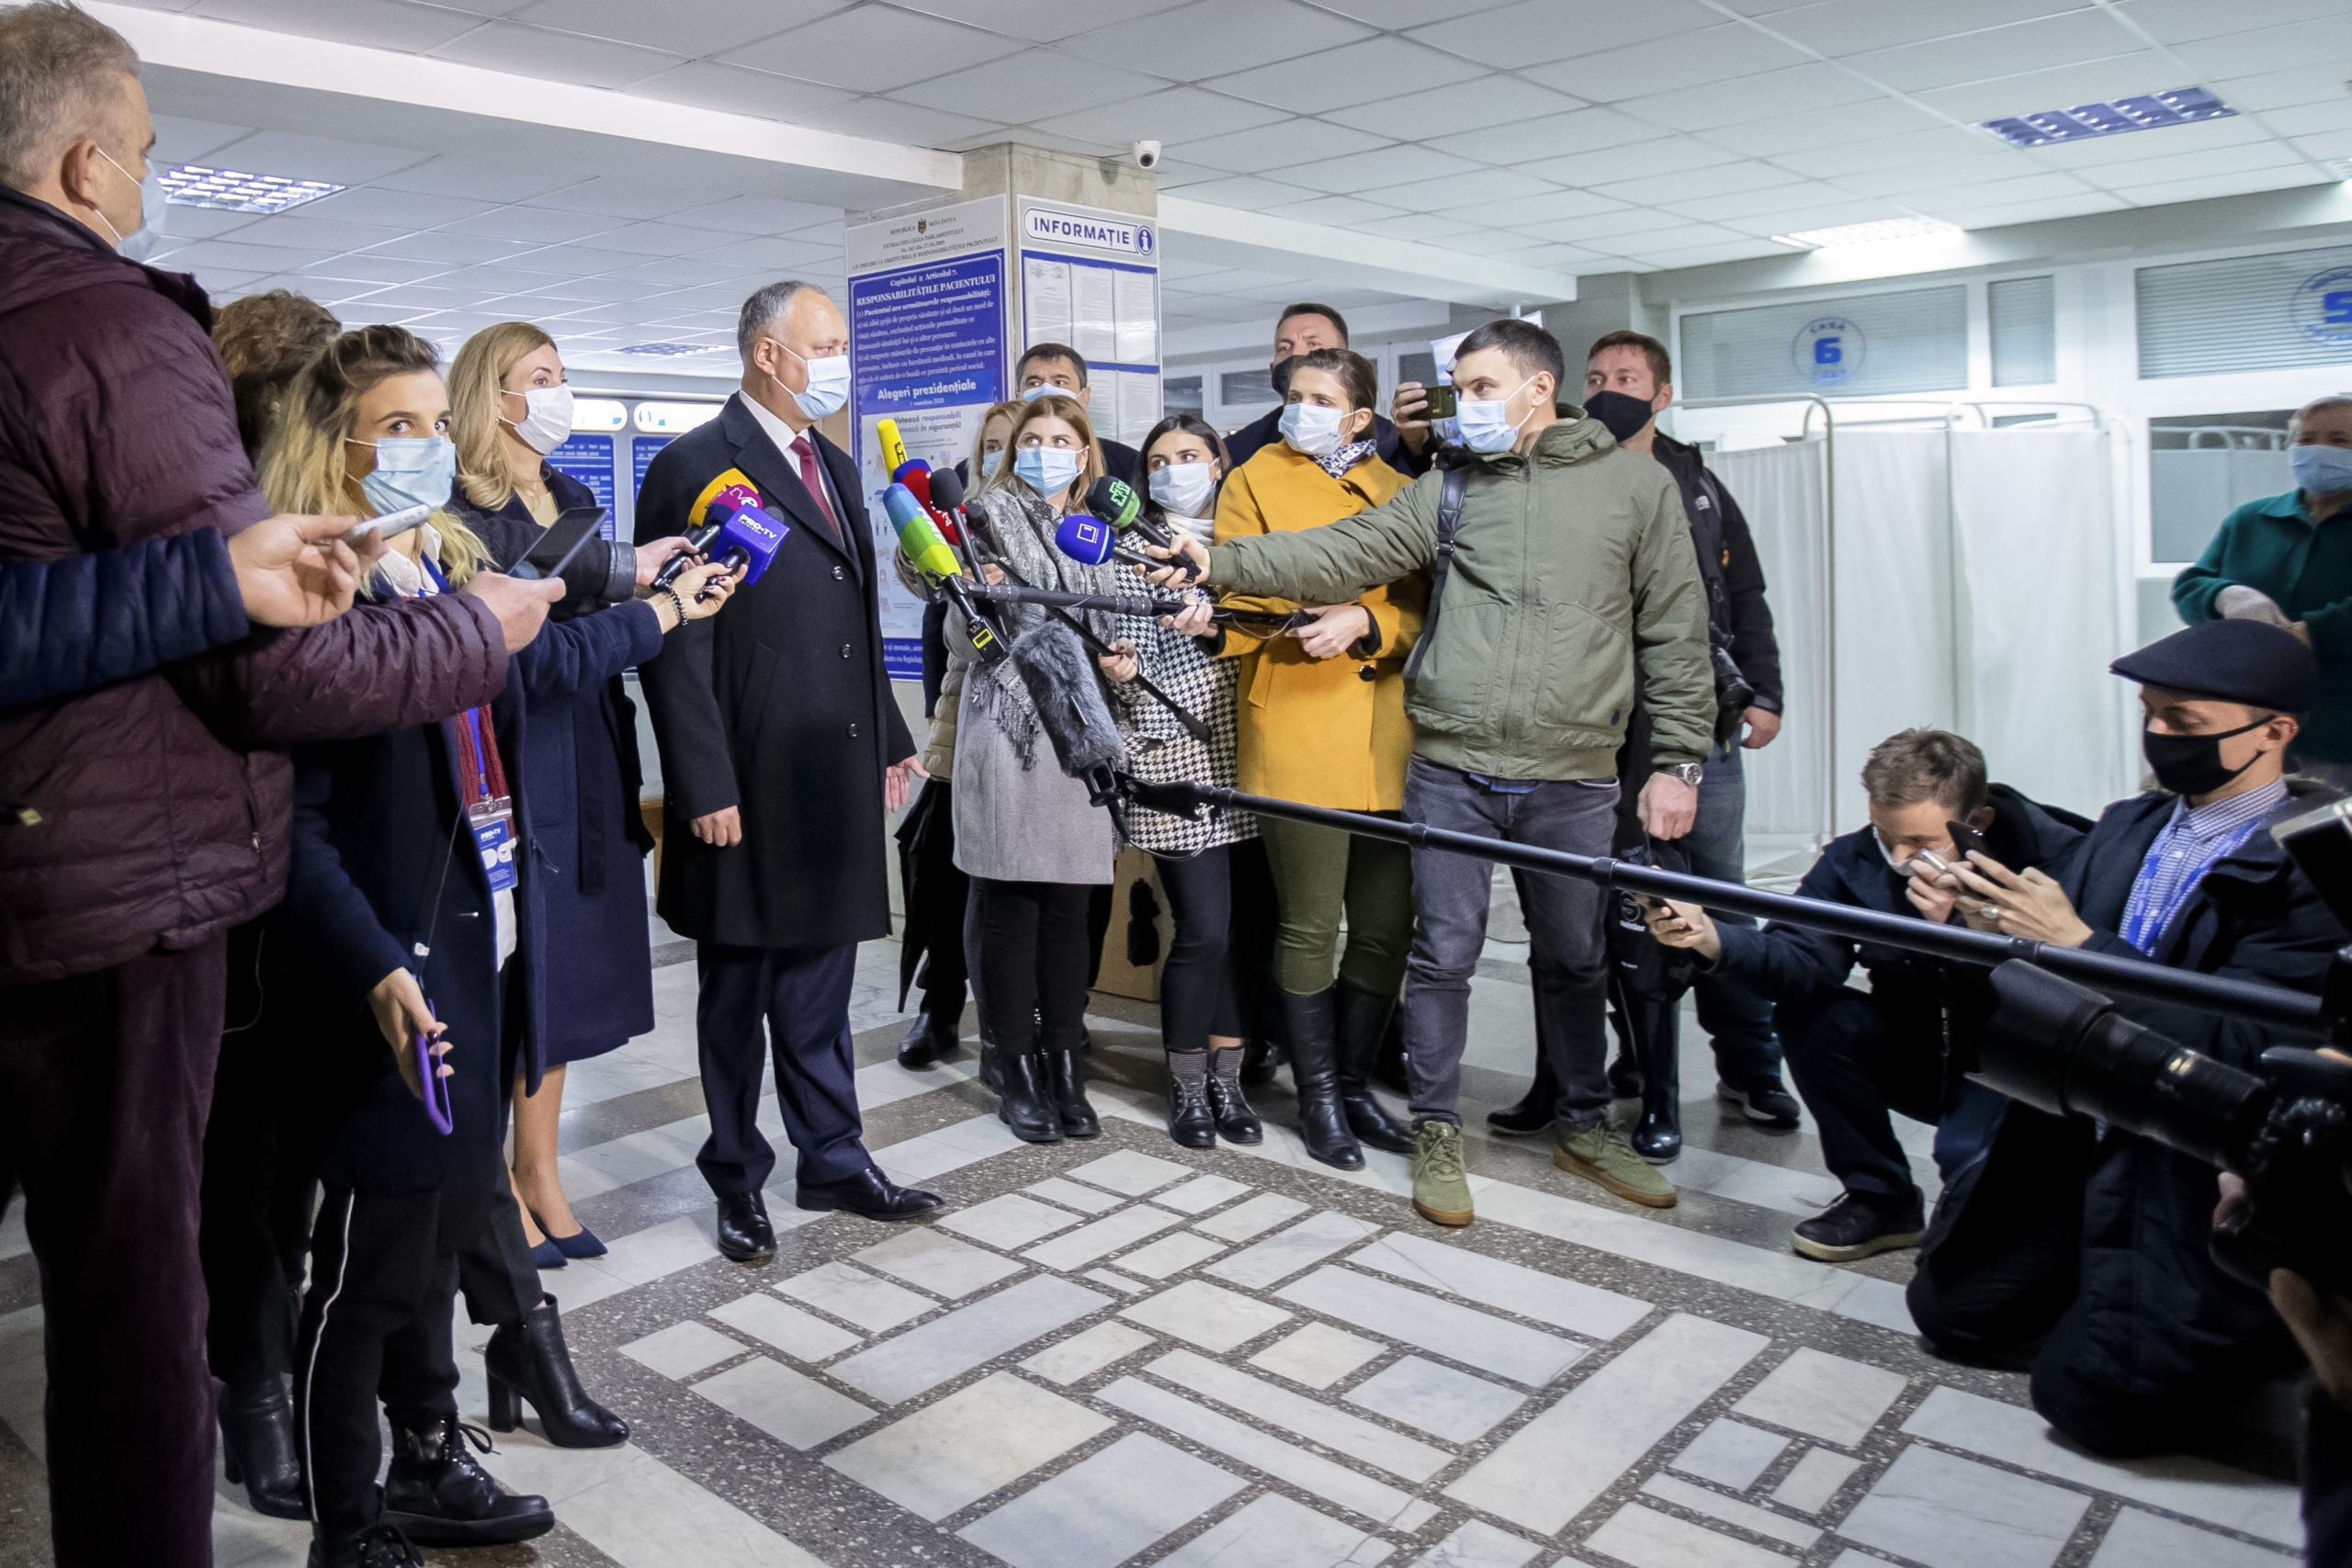 Incumbent Moldovan President Igor Dodon speaks to media after casting his vote in the country's presidential elections in Chisinau, Nov. 1, 2020.  Pro-Western, anti-corruption reformer Maia Sandu unseated pro-Russian Dodon in the election, partly credited to reporting from outlets like RISE